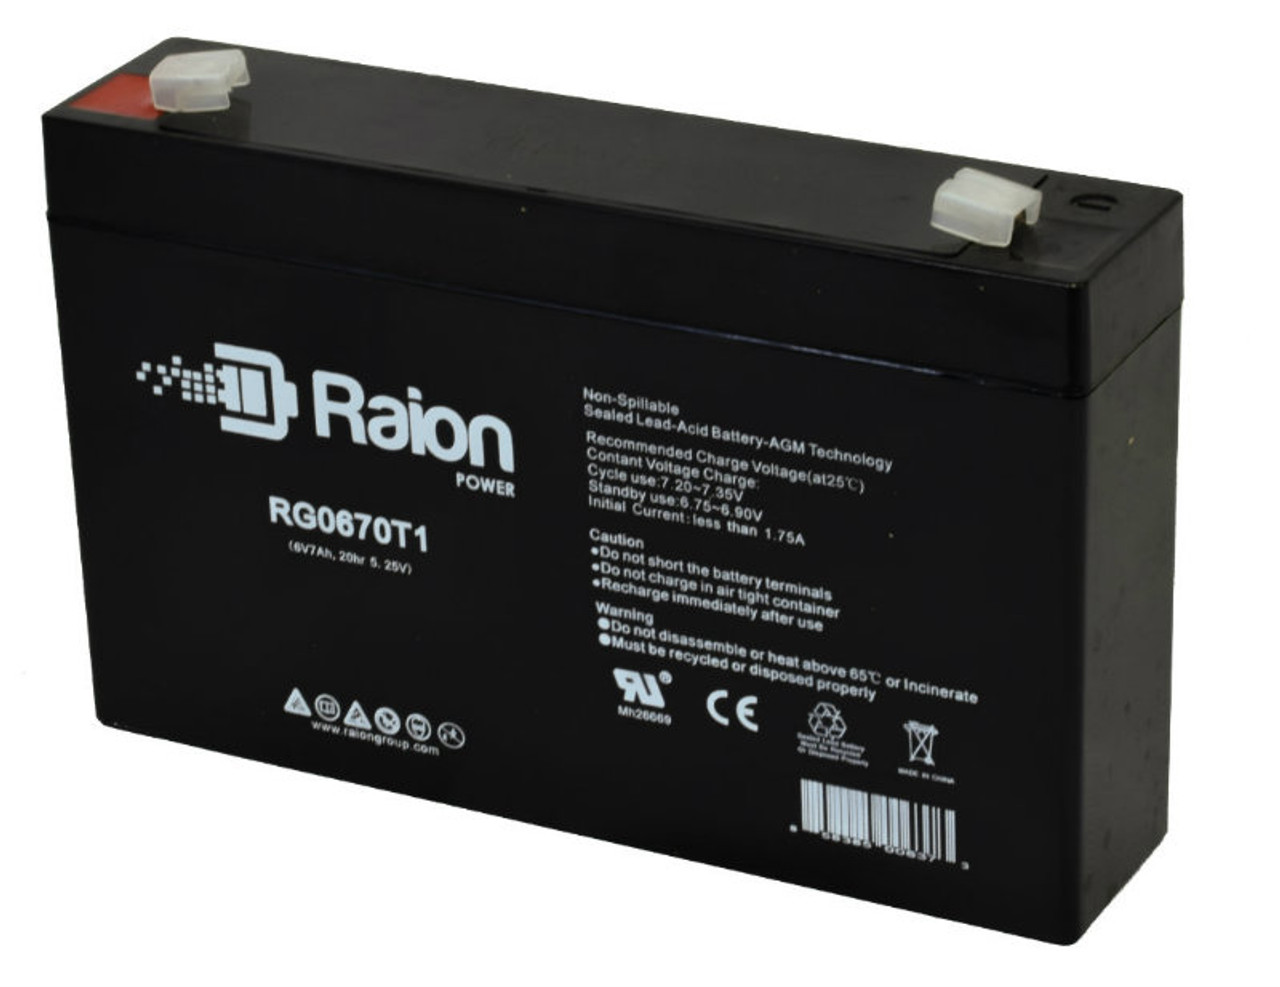 Raion Power RG0670T1 6V 7Ah Replacement Battery Cartridge for Alaris Medical MINI PC1 INFUSION PUMP CNTRLR Medical Equipment